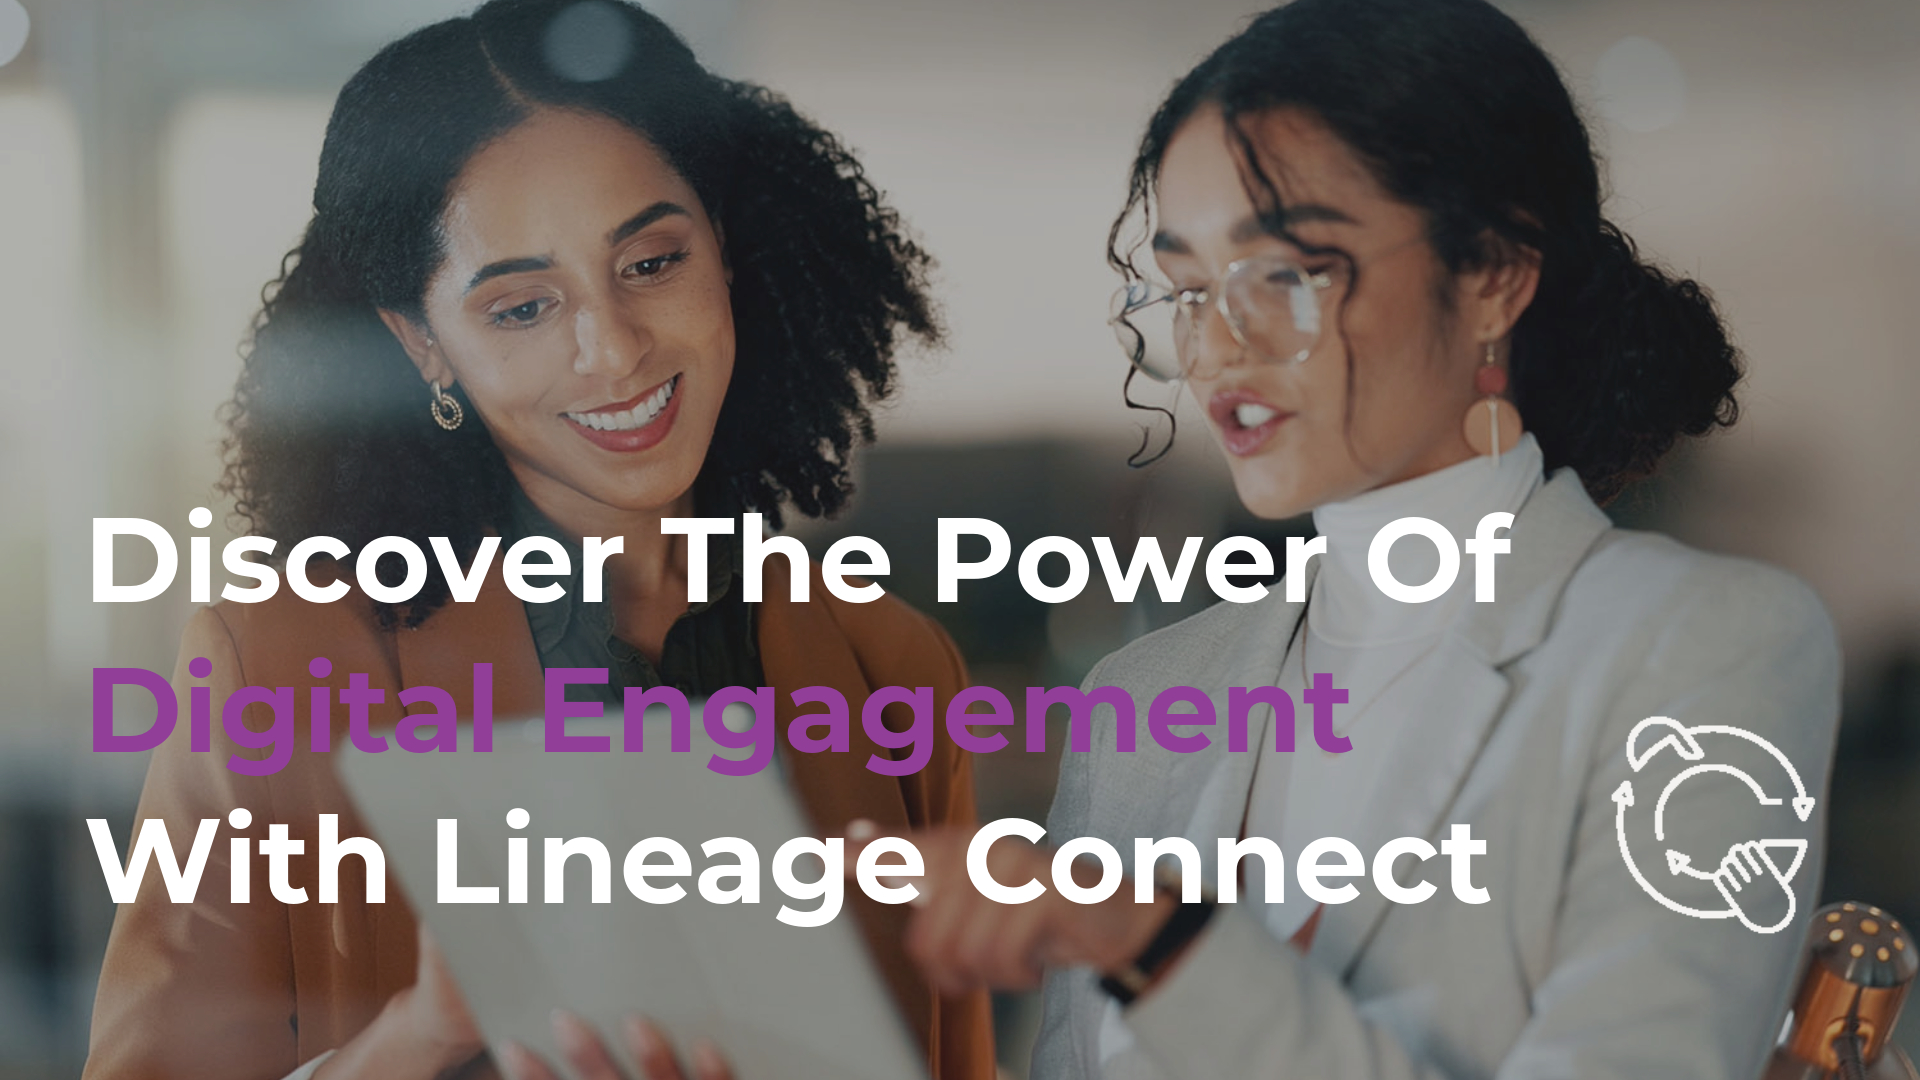 Discover the power of digital engagement with Lineage Connect